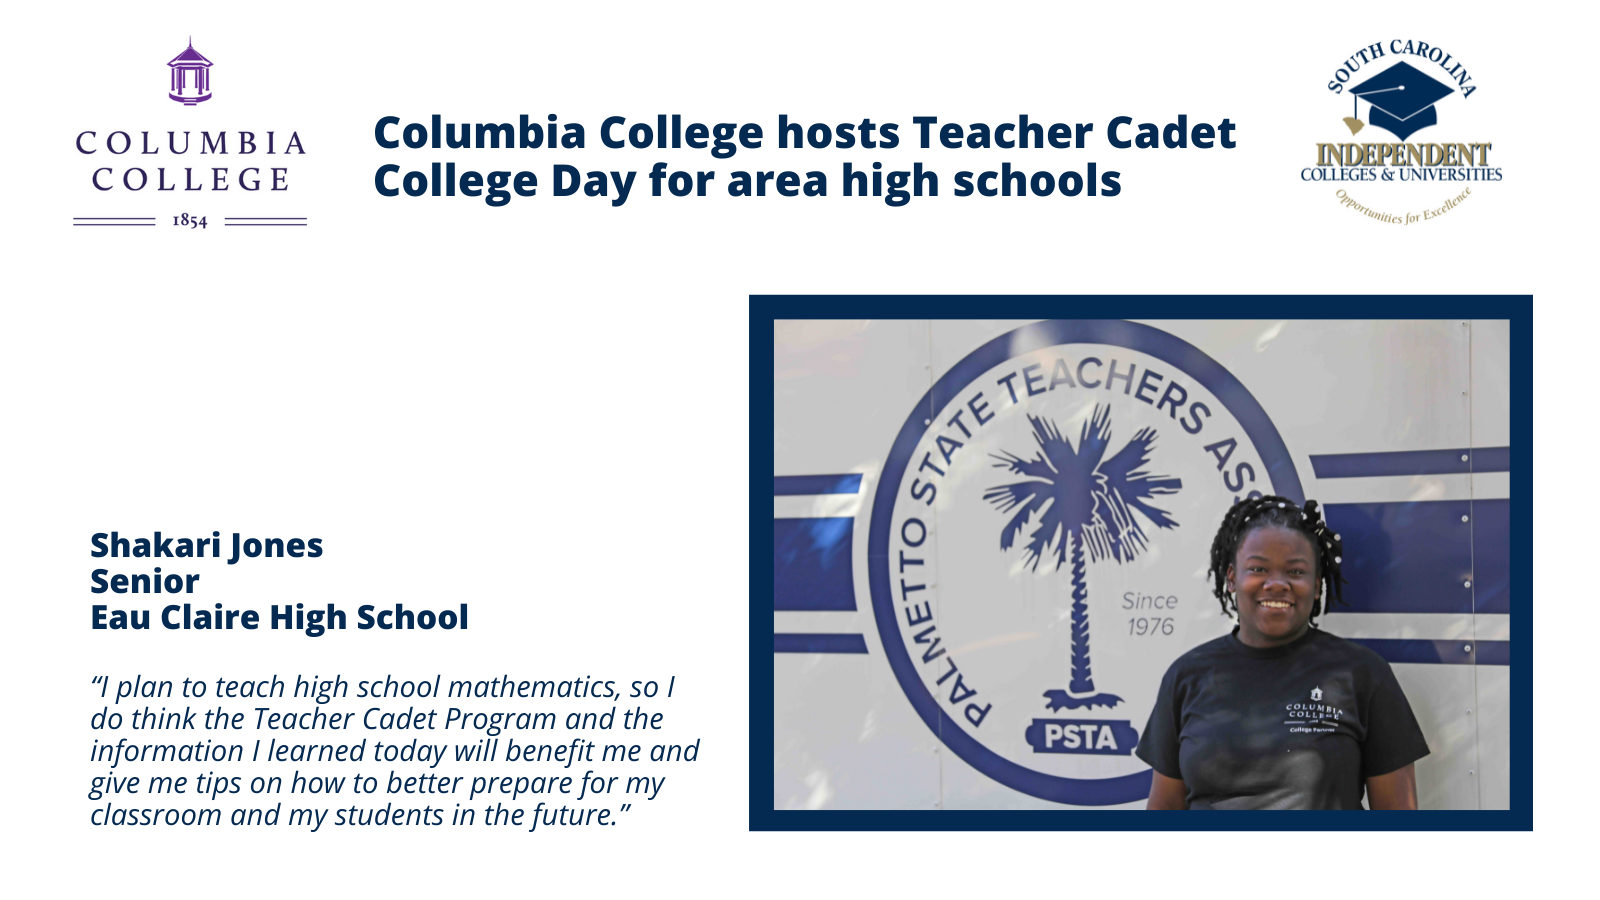 Columbia College held a Teacher Cadet College Day for Columbia-area high schools Nov. 2.